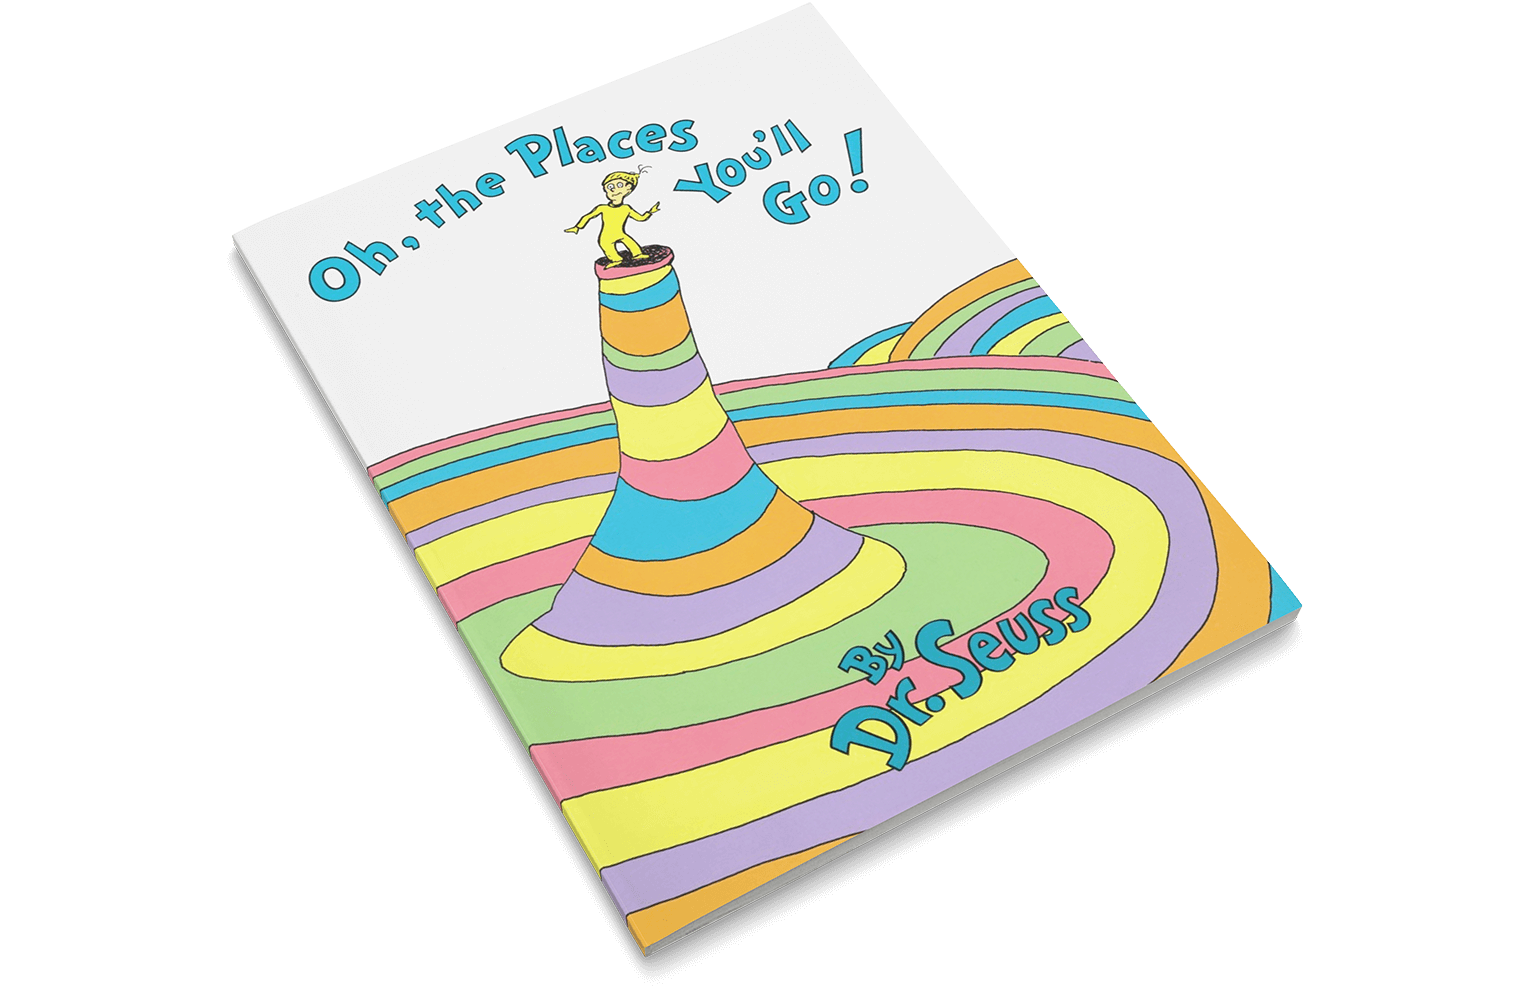 Oh, The Places You'll Go! by Dr. Seuss — YM360